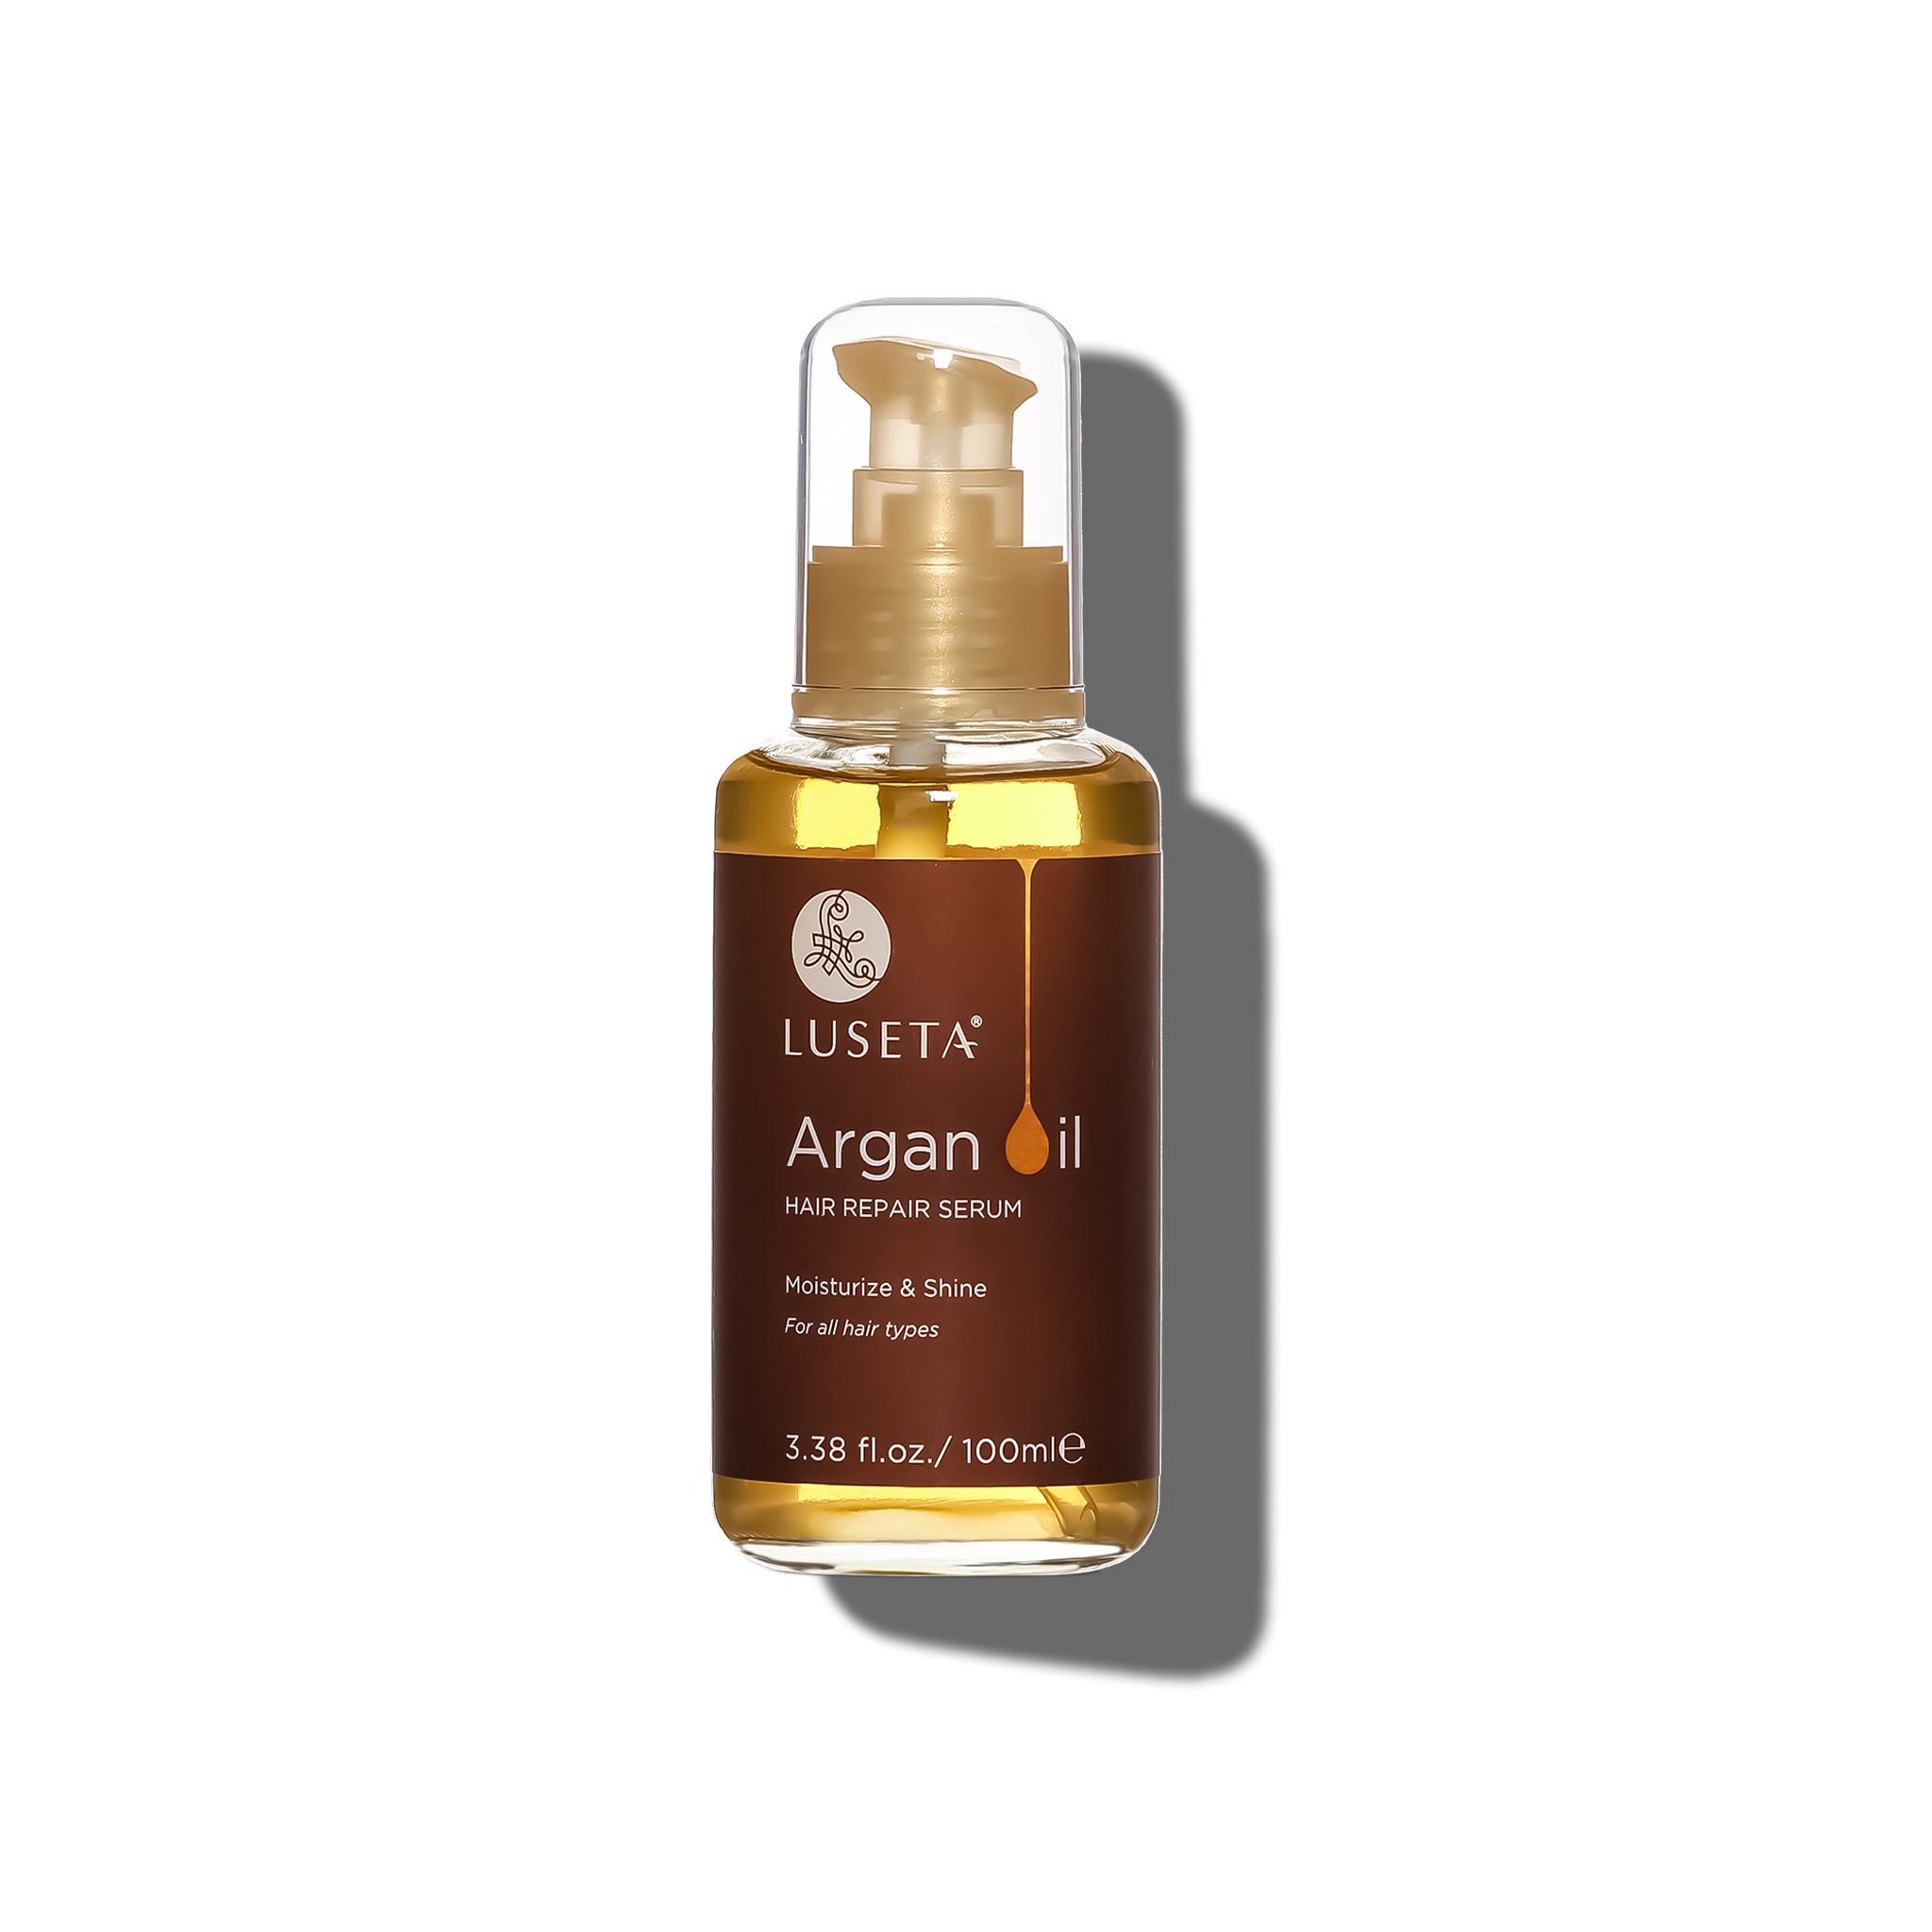 Luseta Argan Oil Hair Serum offers the hair strands the ultimate protection...